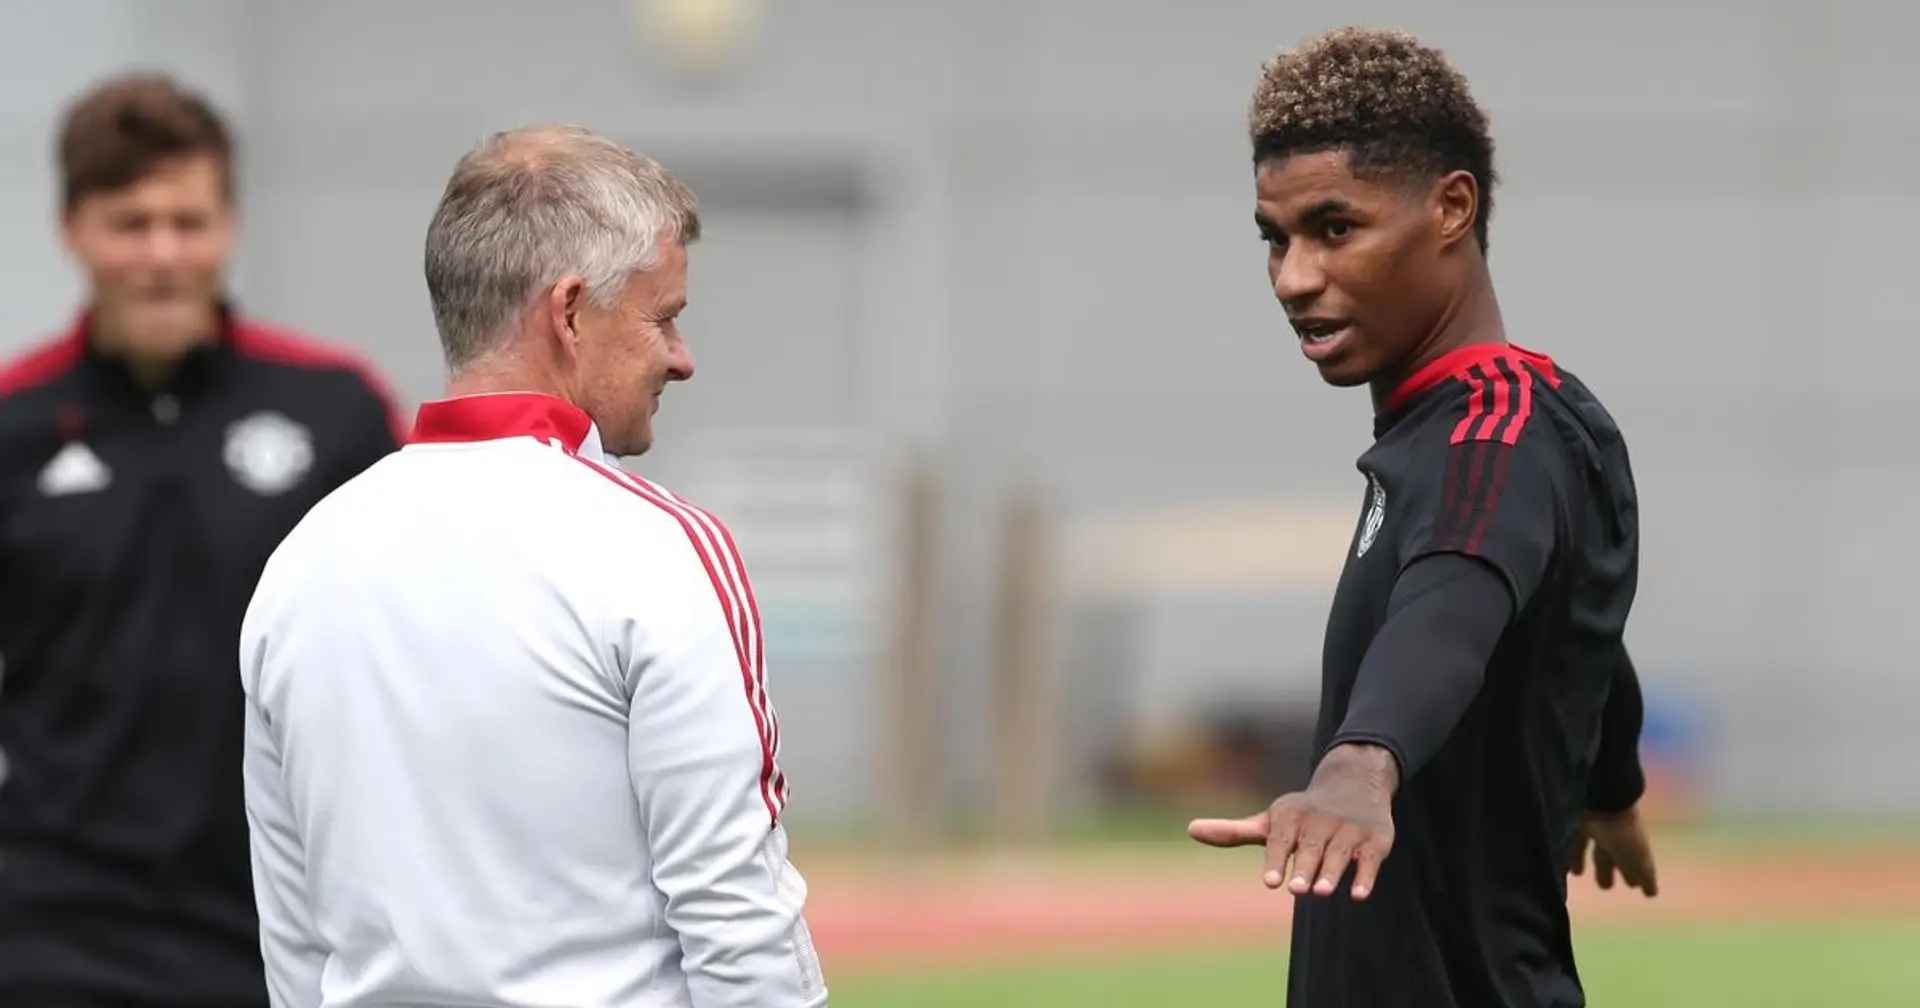 'I managed Marcus for 3 years': Solskjaer reveals who should be blamed for Rashford's poor form